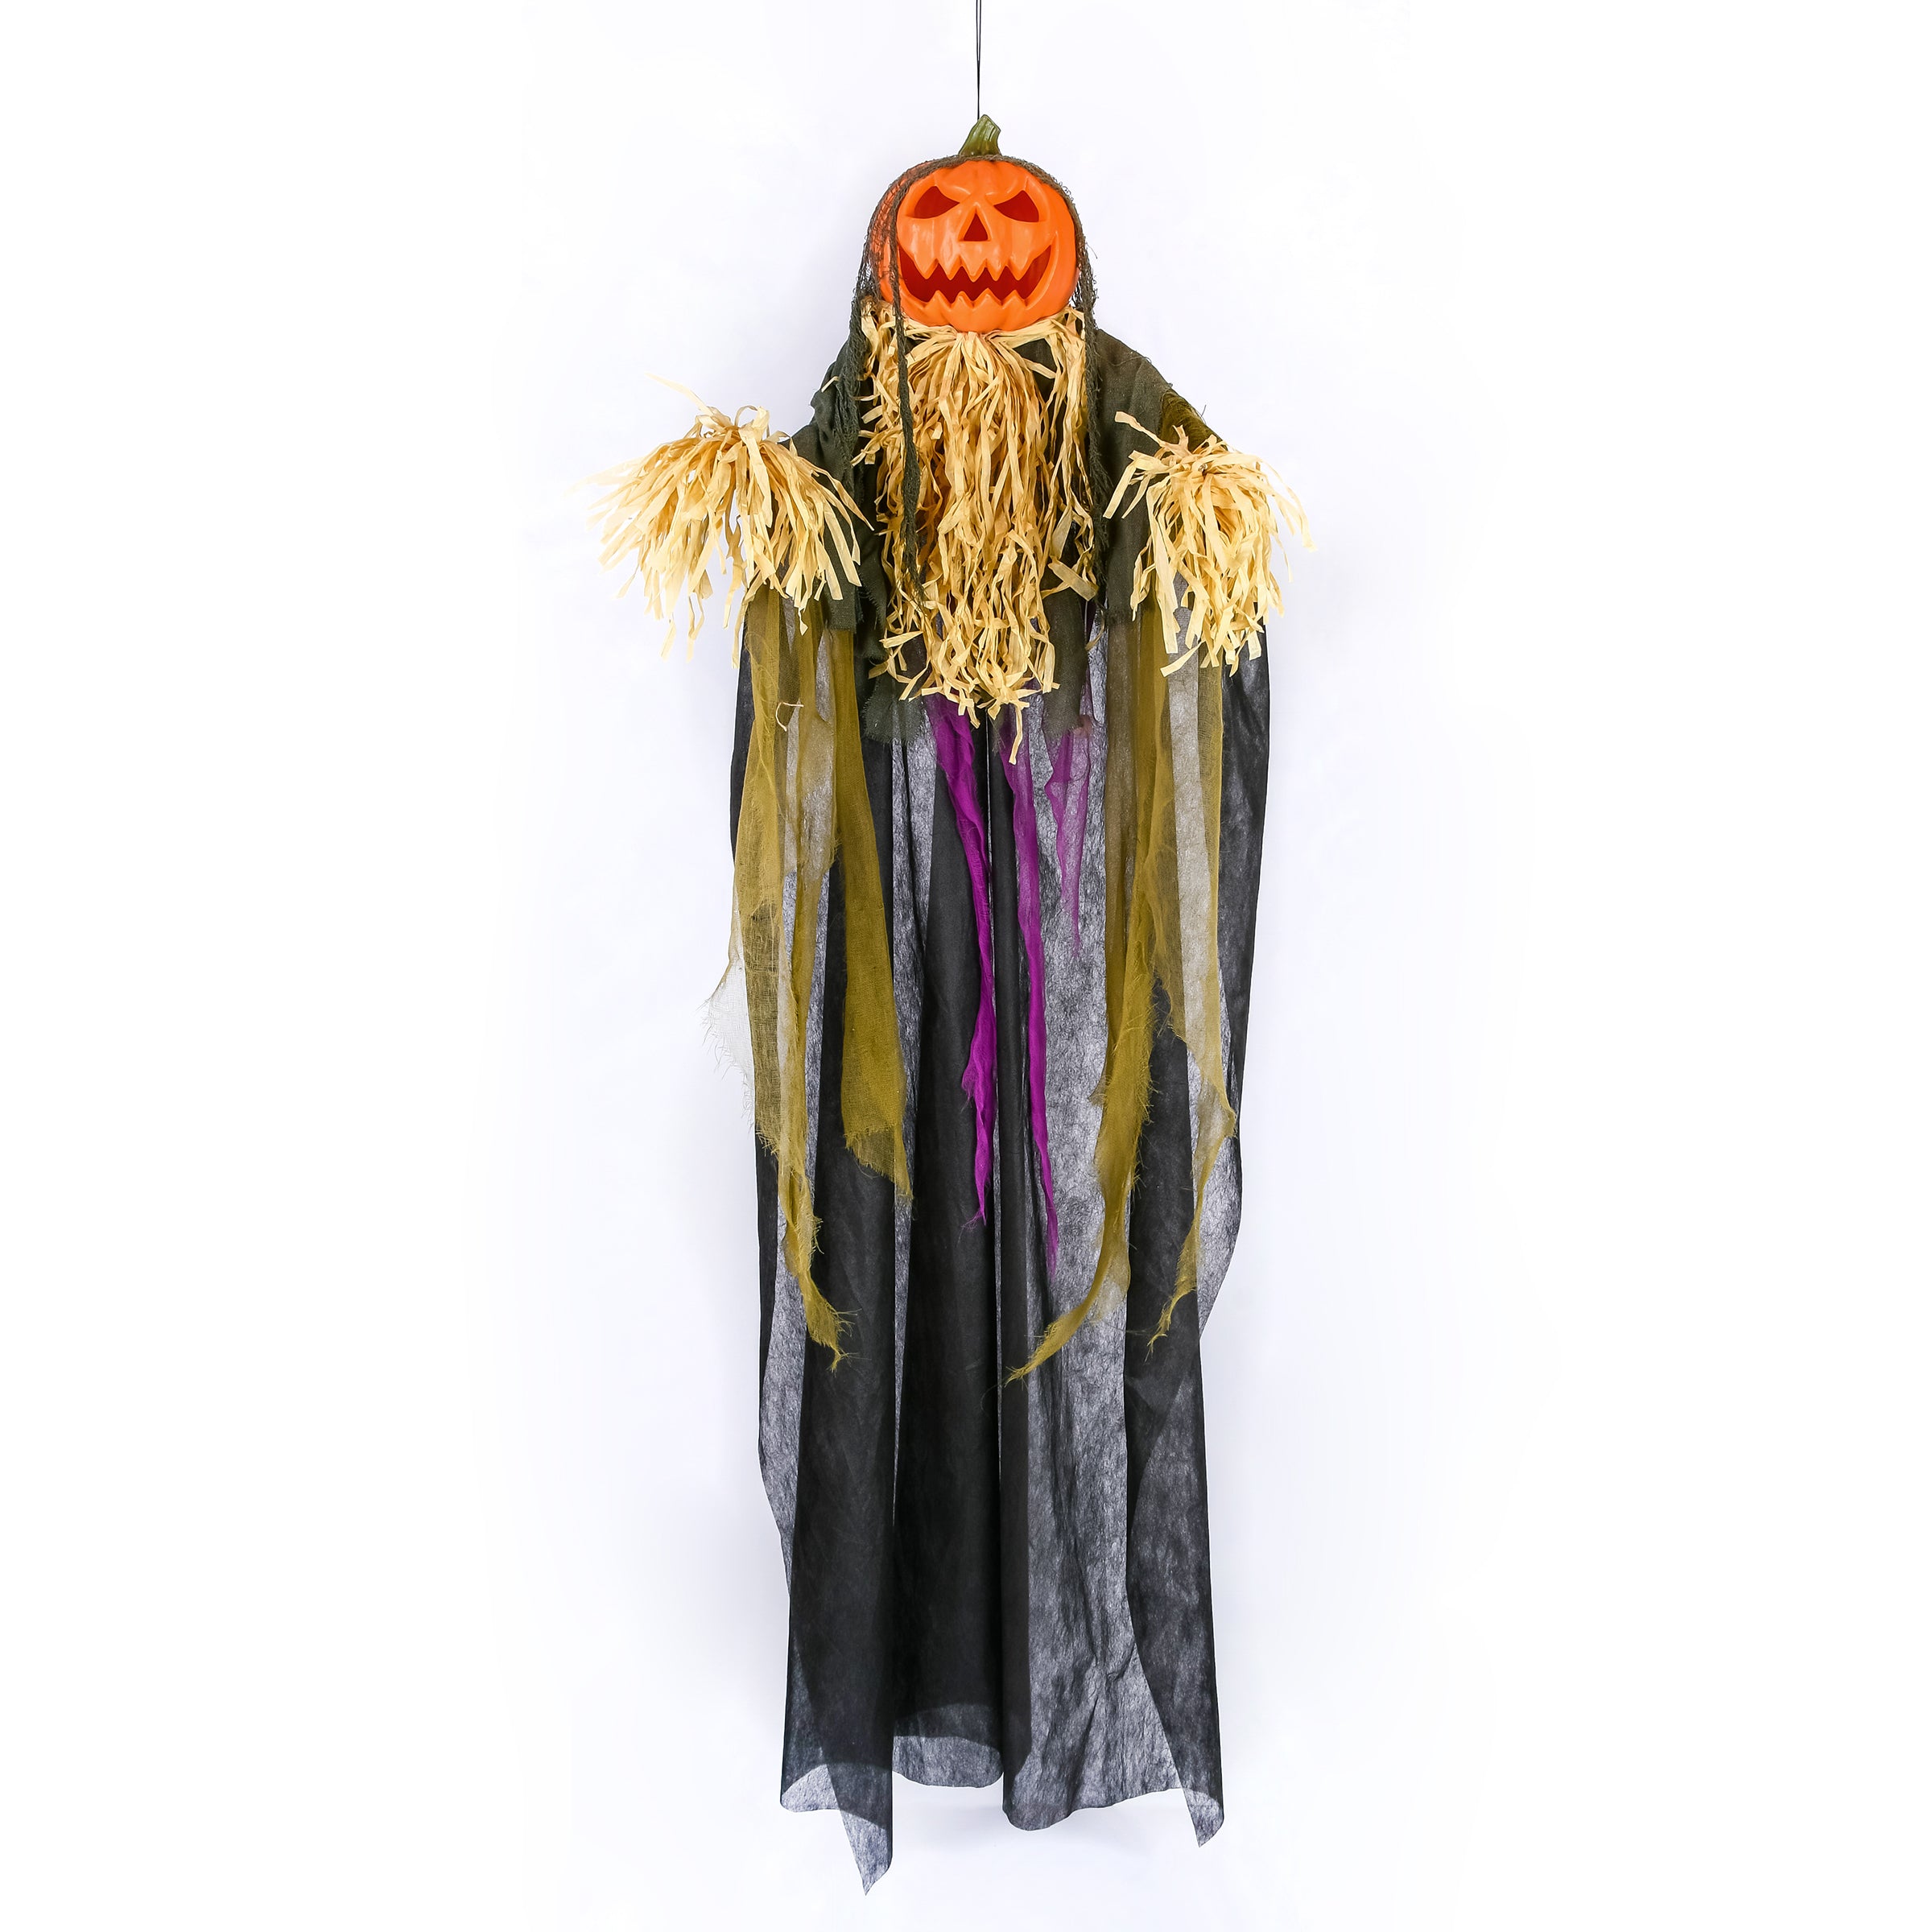 Halloween Pre Lit Animated Hanging Scarecrow, Black, Sound Activated, LED Lights, Battery Operated, 6 Feet